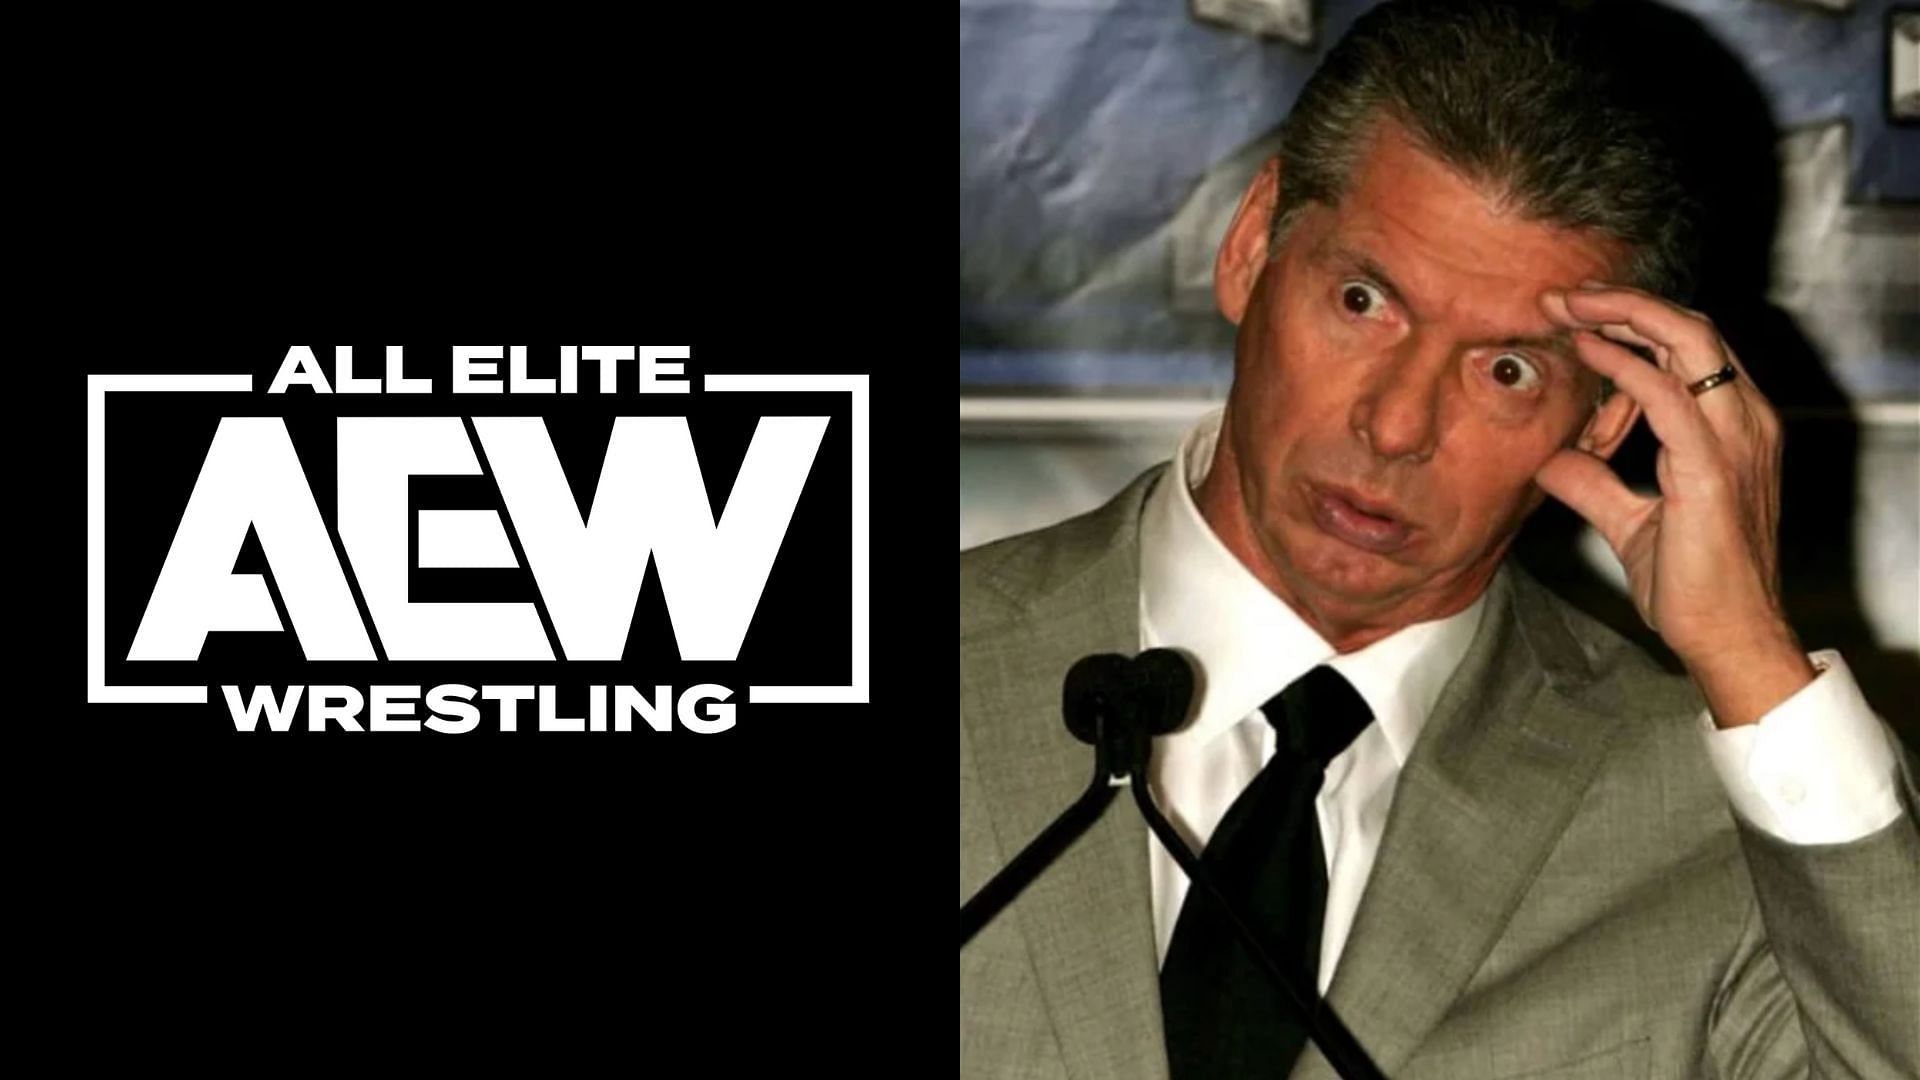 Would Vince McMahon still welcome this AEW star back into WWE?